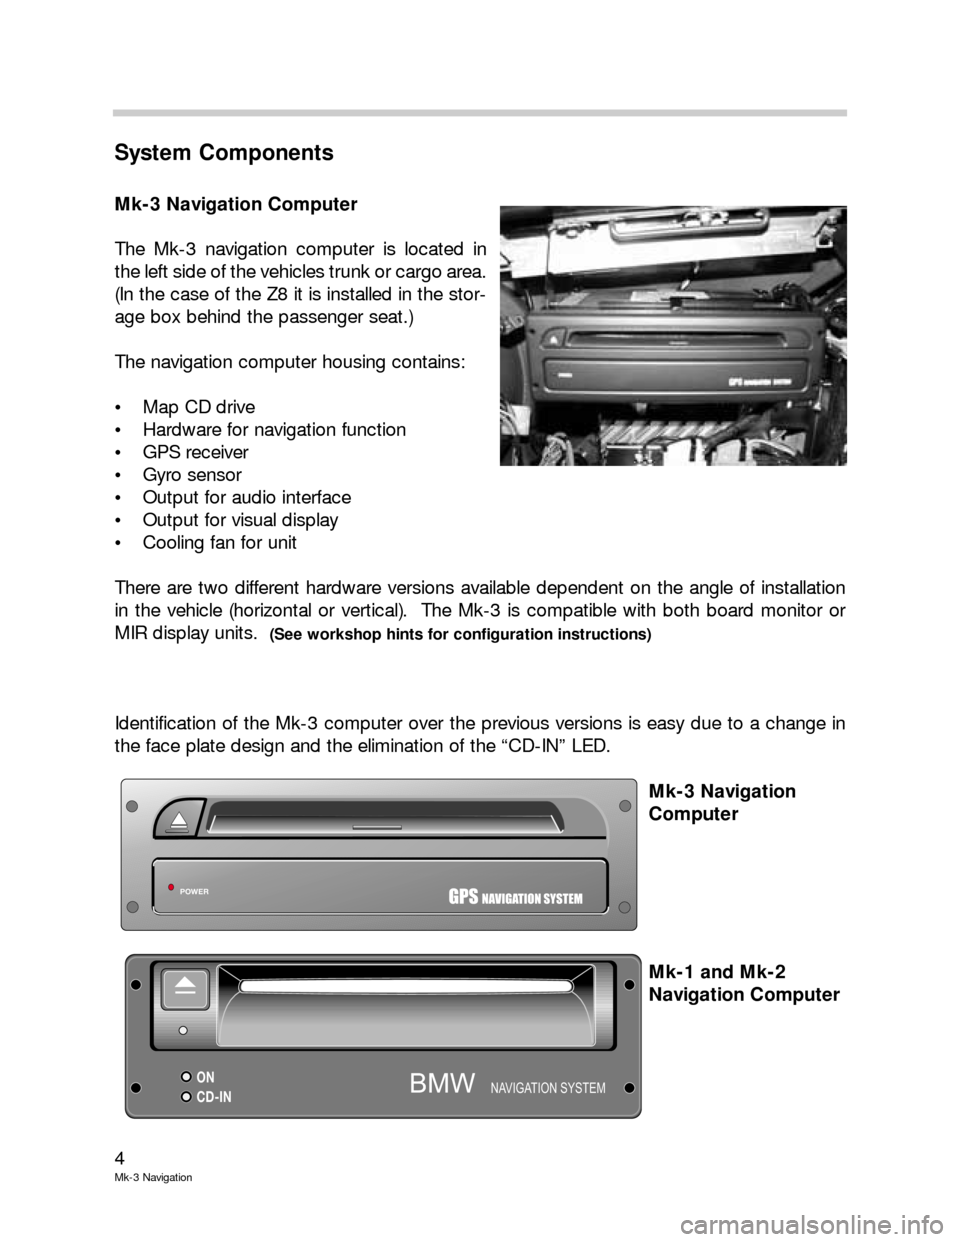 BMW X5 2002 E53 Mk3 Navigation System Manual 4
Mk-3 Navigation
System Components
Mk-3 Navigation Computer
The Mk-3 navigation computer is located in
the left side of the vehicles trunk or cargo area.
(In the case of the Z8 it is installed in the